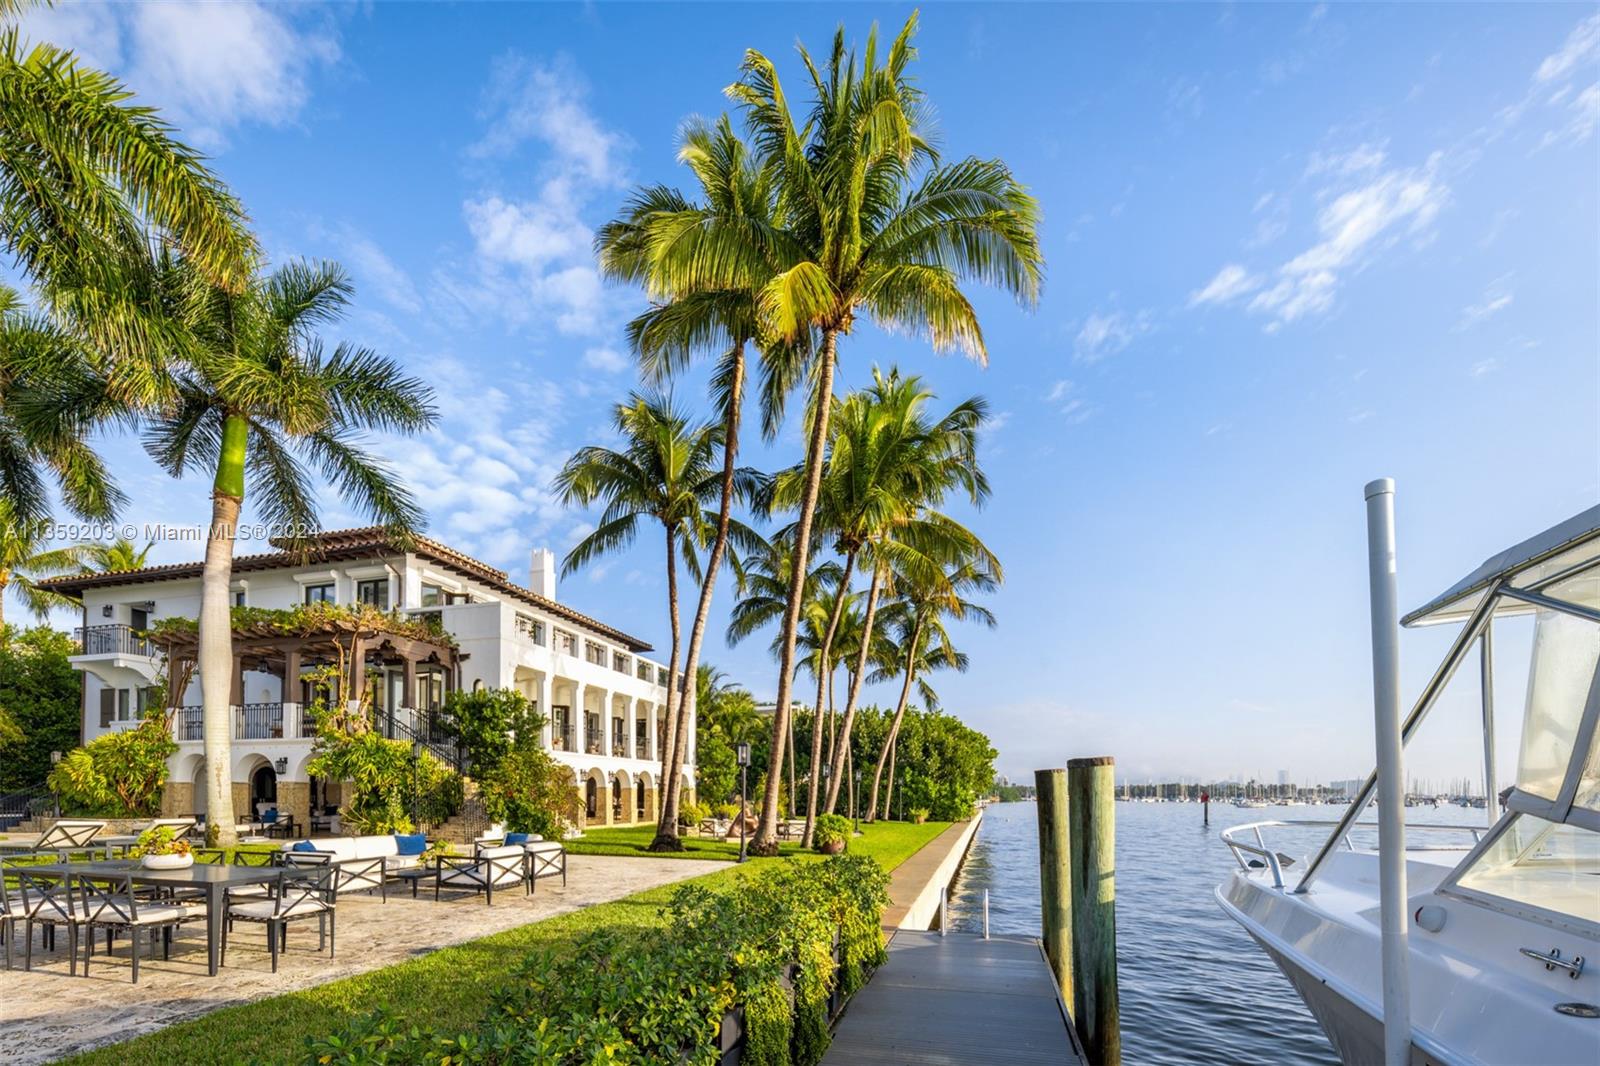 Perfectly set on a ½ acre +, bayfront estate, this 3-story Villa is the epitome of sophisticated Miami living. Step into the atrium boasting 30’ ceilings, Jerusalem stone staircase where you are greeted by unobstructed panoramic water views of the Miami skyline.From the mahogany floors to the 40’ dock, every attention to detail is reflected in this estate’s craftsmanship. Enjoy views of Biscayne Bay from the grand room or the open terrace, ideal for outdoor entertaining while overlooking the pool &amp; 300’ of open bay. 8 beds &amp; 8/1 baths are perfectly spread out over 10,100 sf of area. Located in private, guard-gated &amp; historic community of Camp Biscayne, enjoy tranquility in this estate while being steps away from some of the country’s finest private schools, shops, restaurants, &amp; marinas.